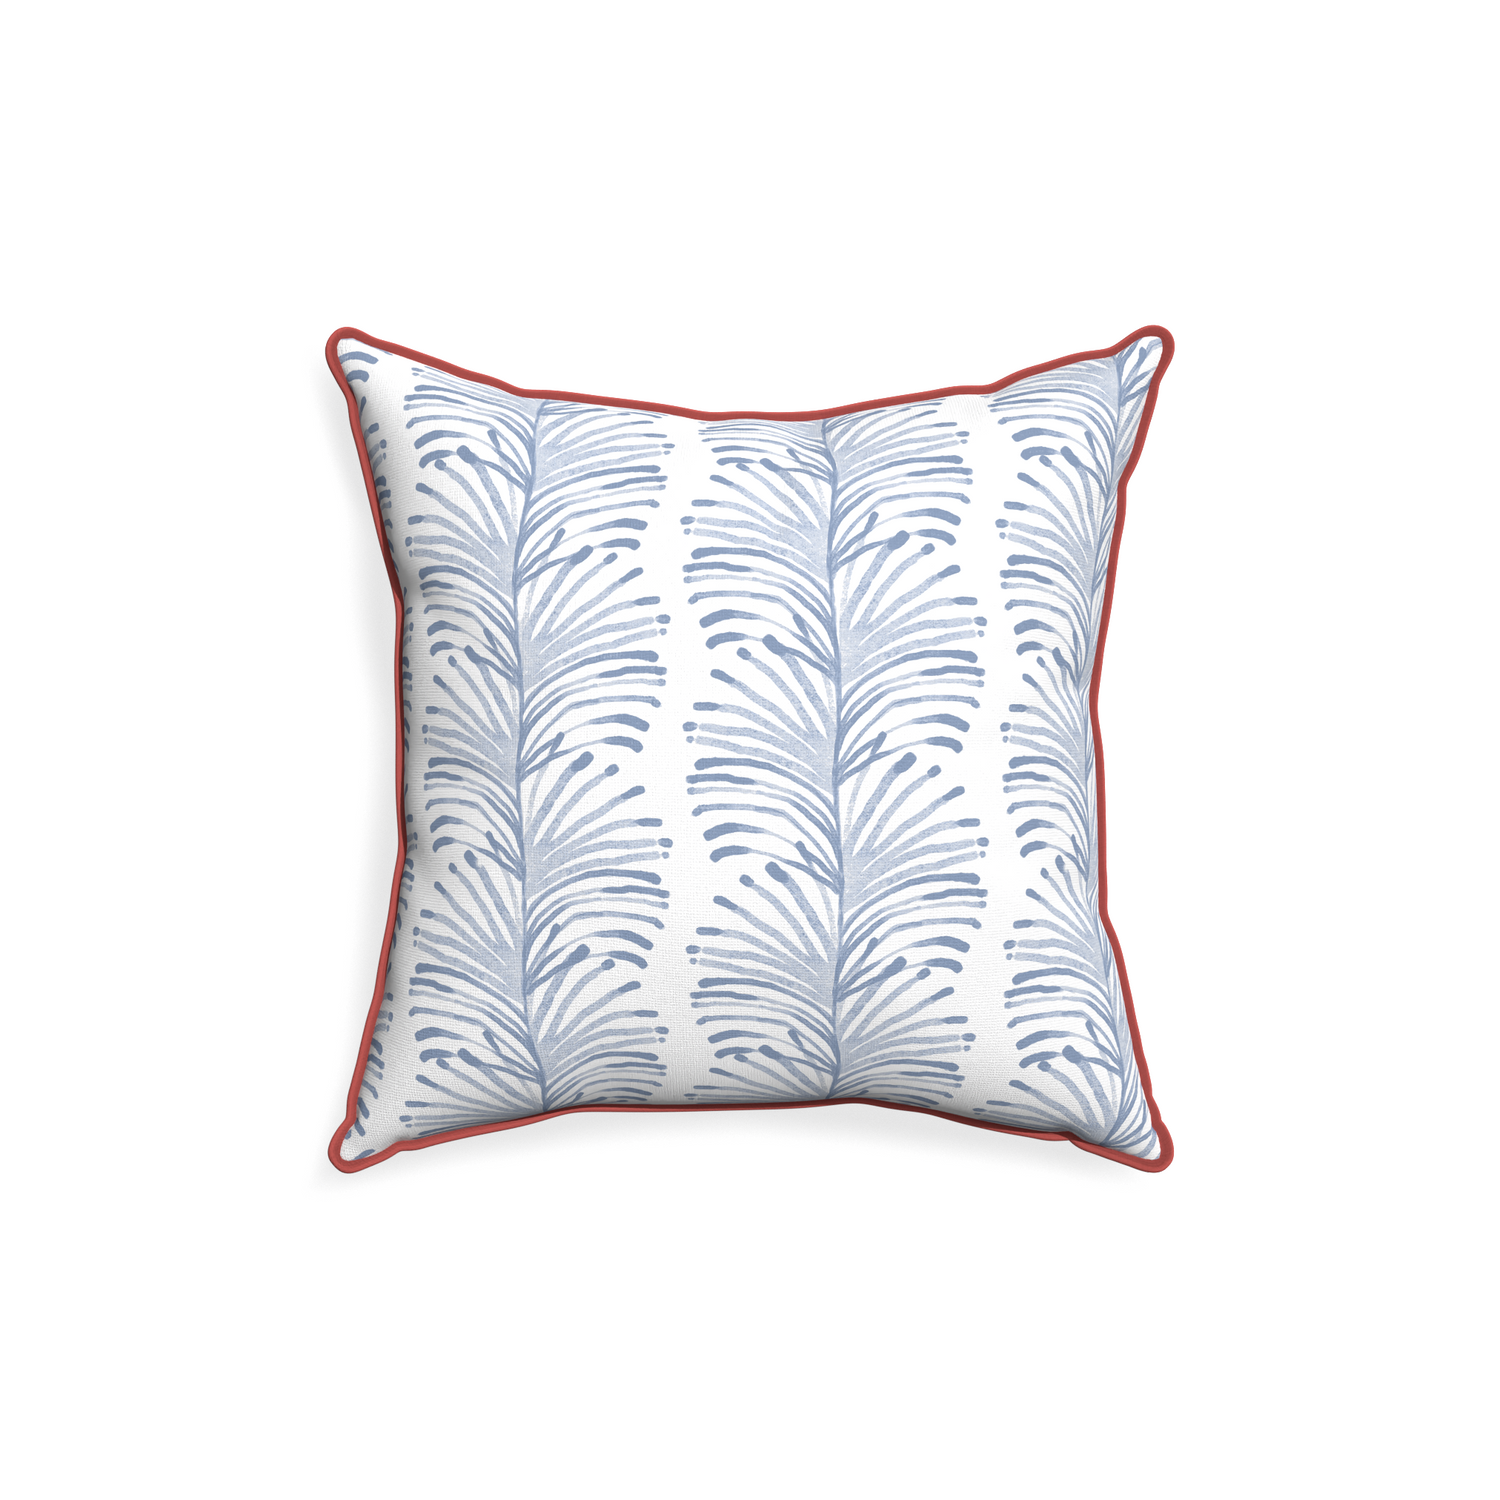 18-square emma sky custom sky blue botanical stripepillow with c piping on white background